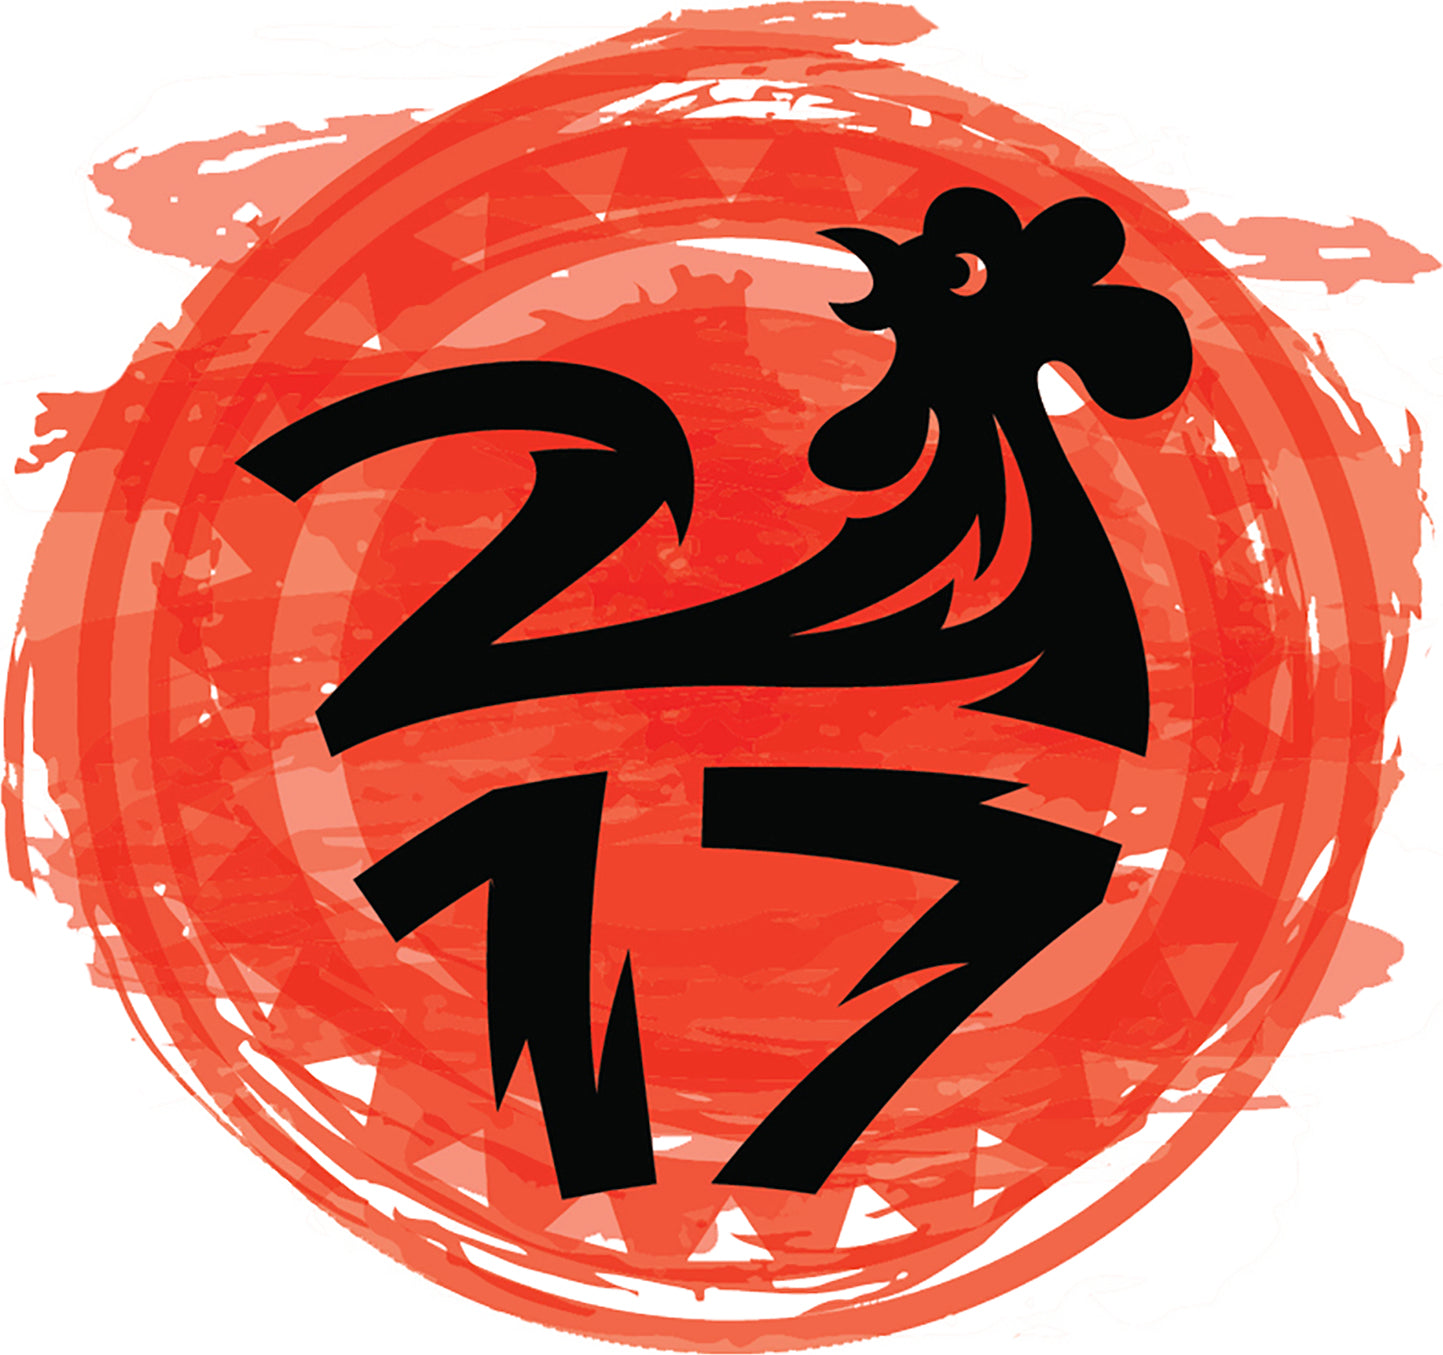 Cool Orange 2017 Year of the Rooster Asian Zodiac Cartoon Icon #9 Vinyl Sticker